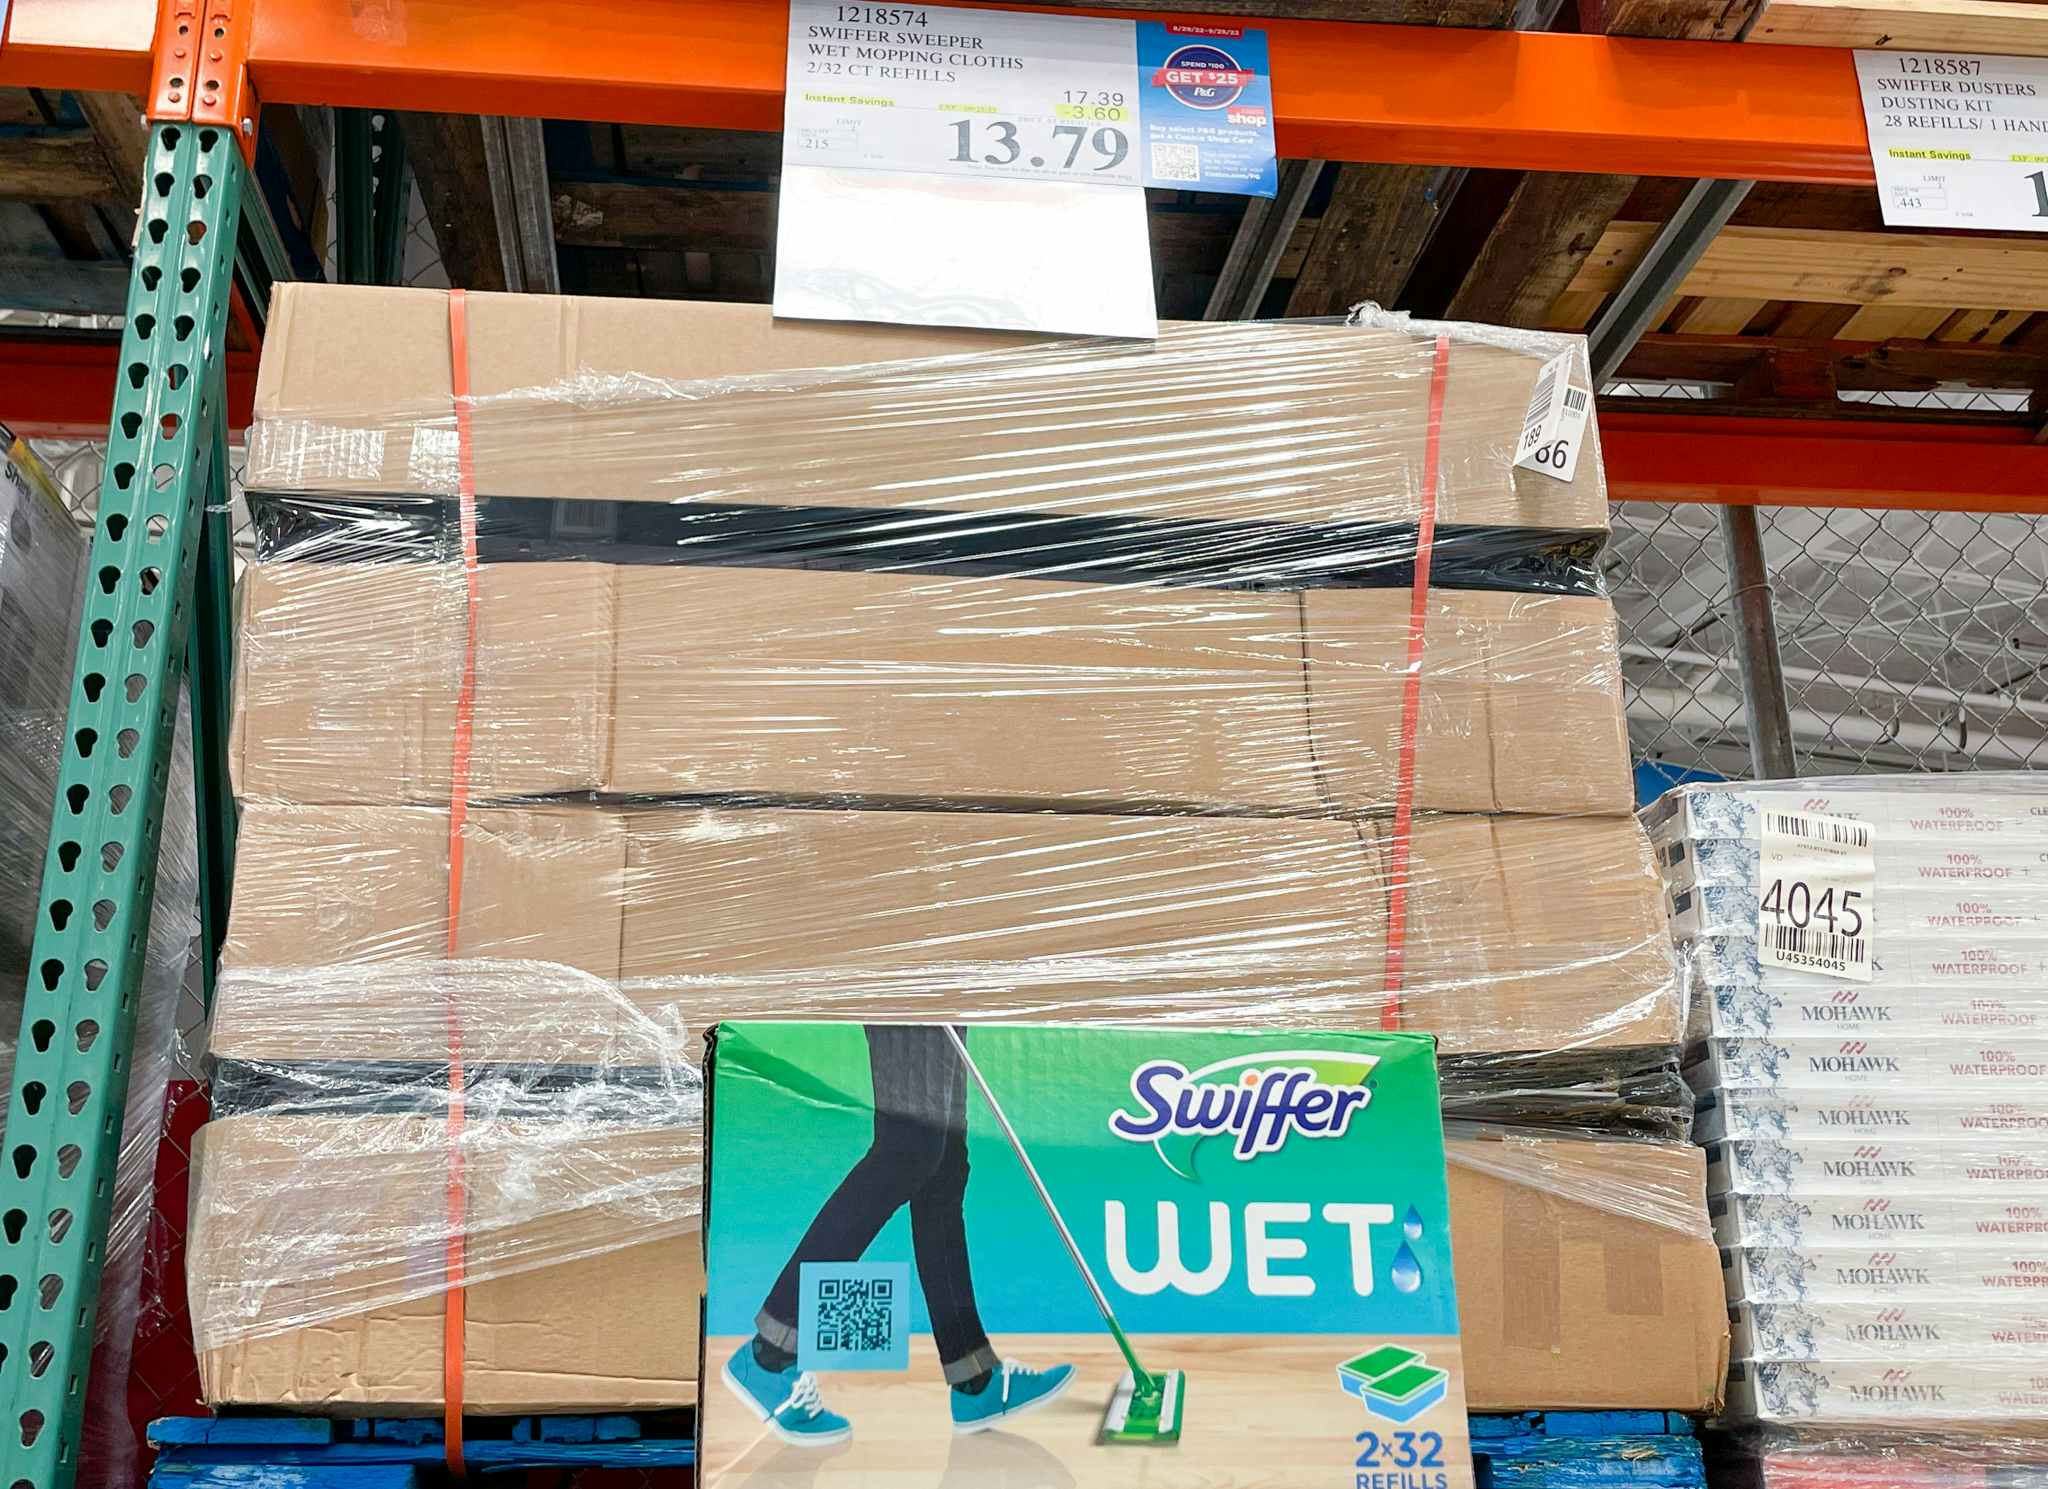 wet mopping cloths at costco